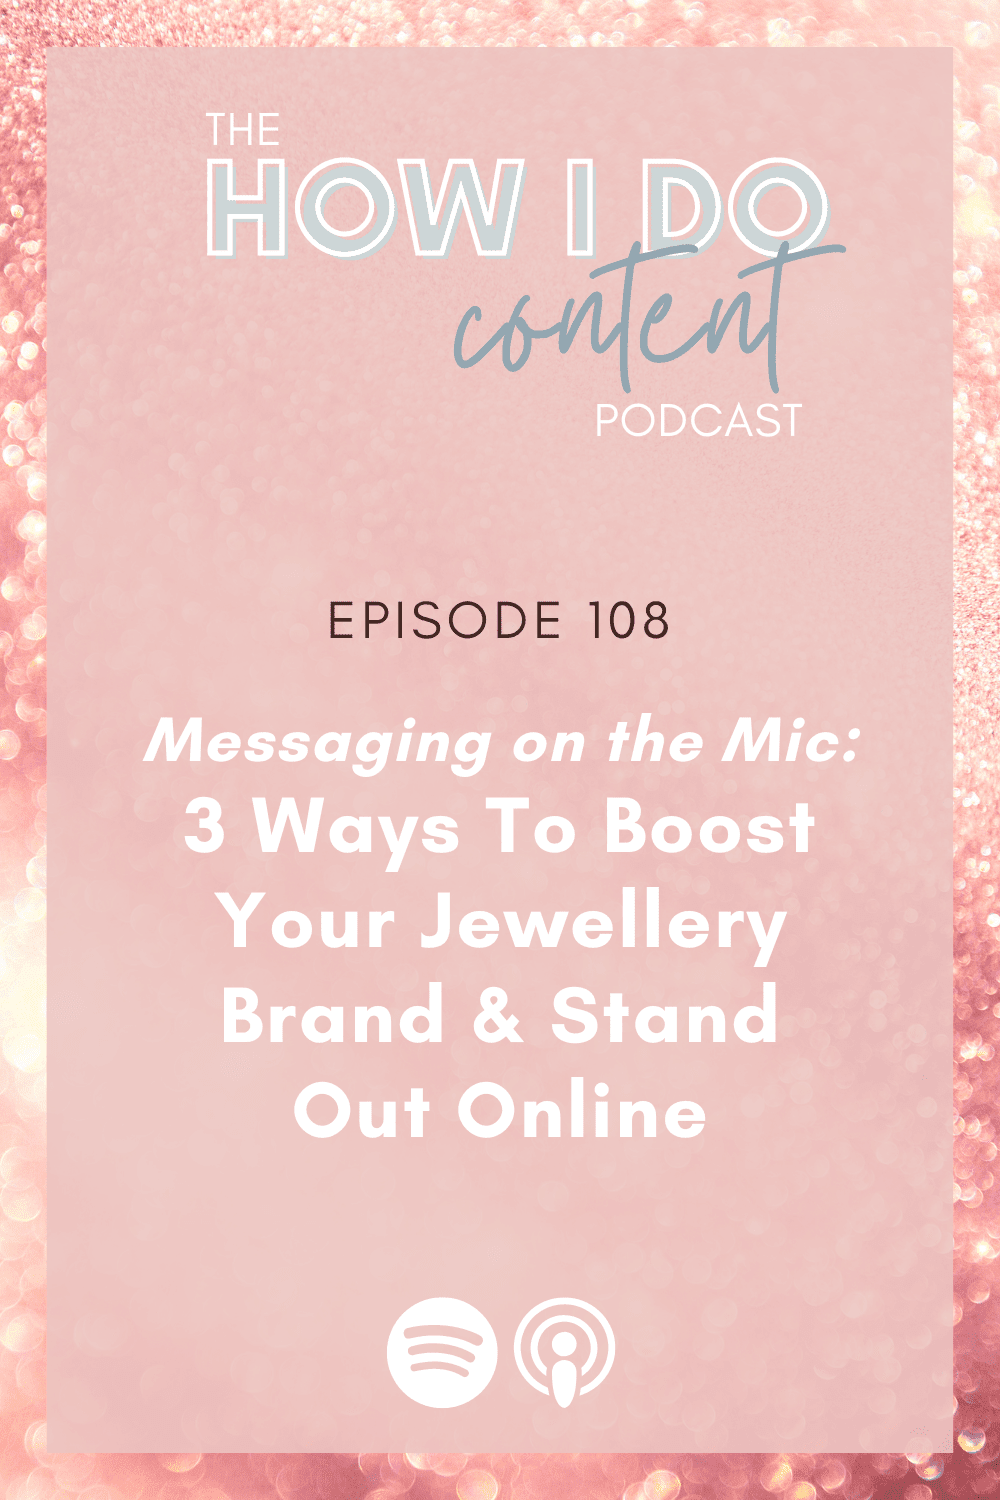 3 Ways To Boost Your Jewellery Brand & Stand Out Online